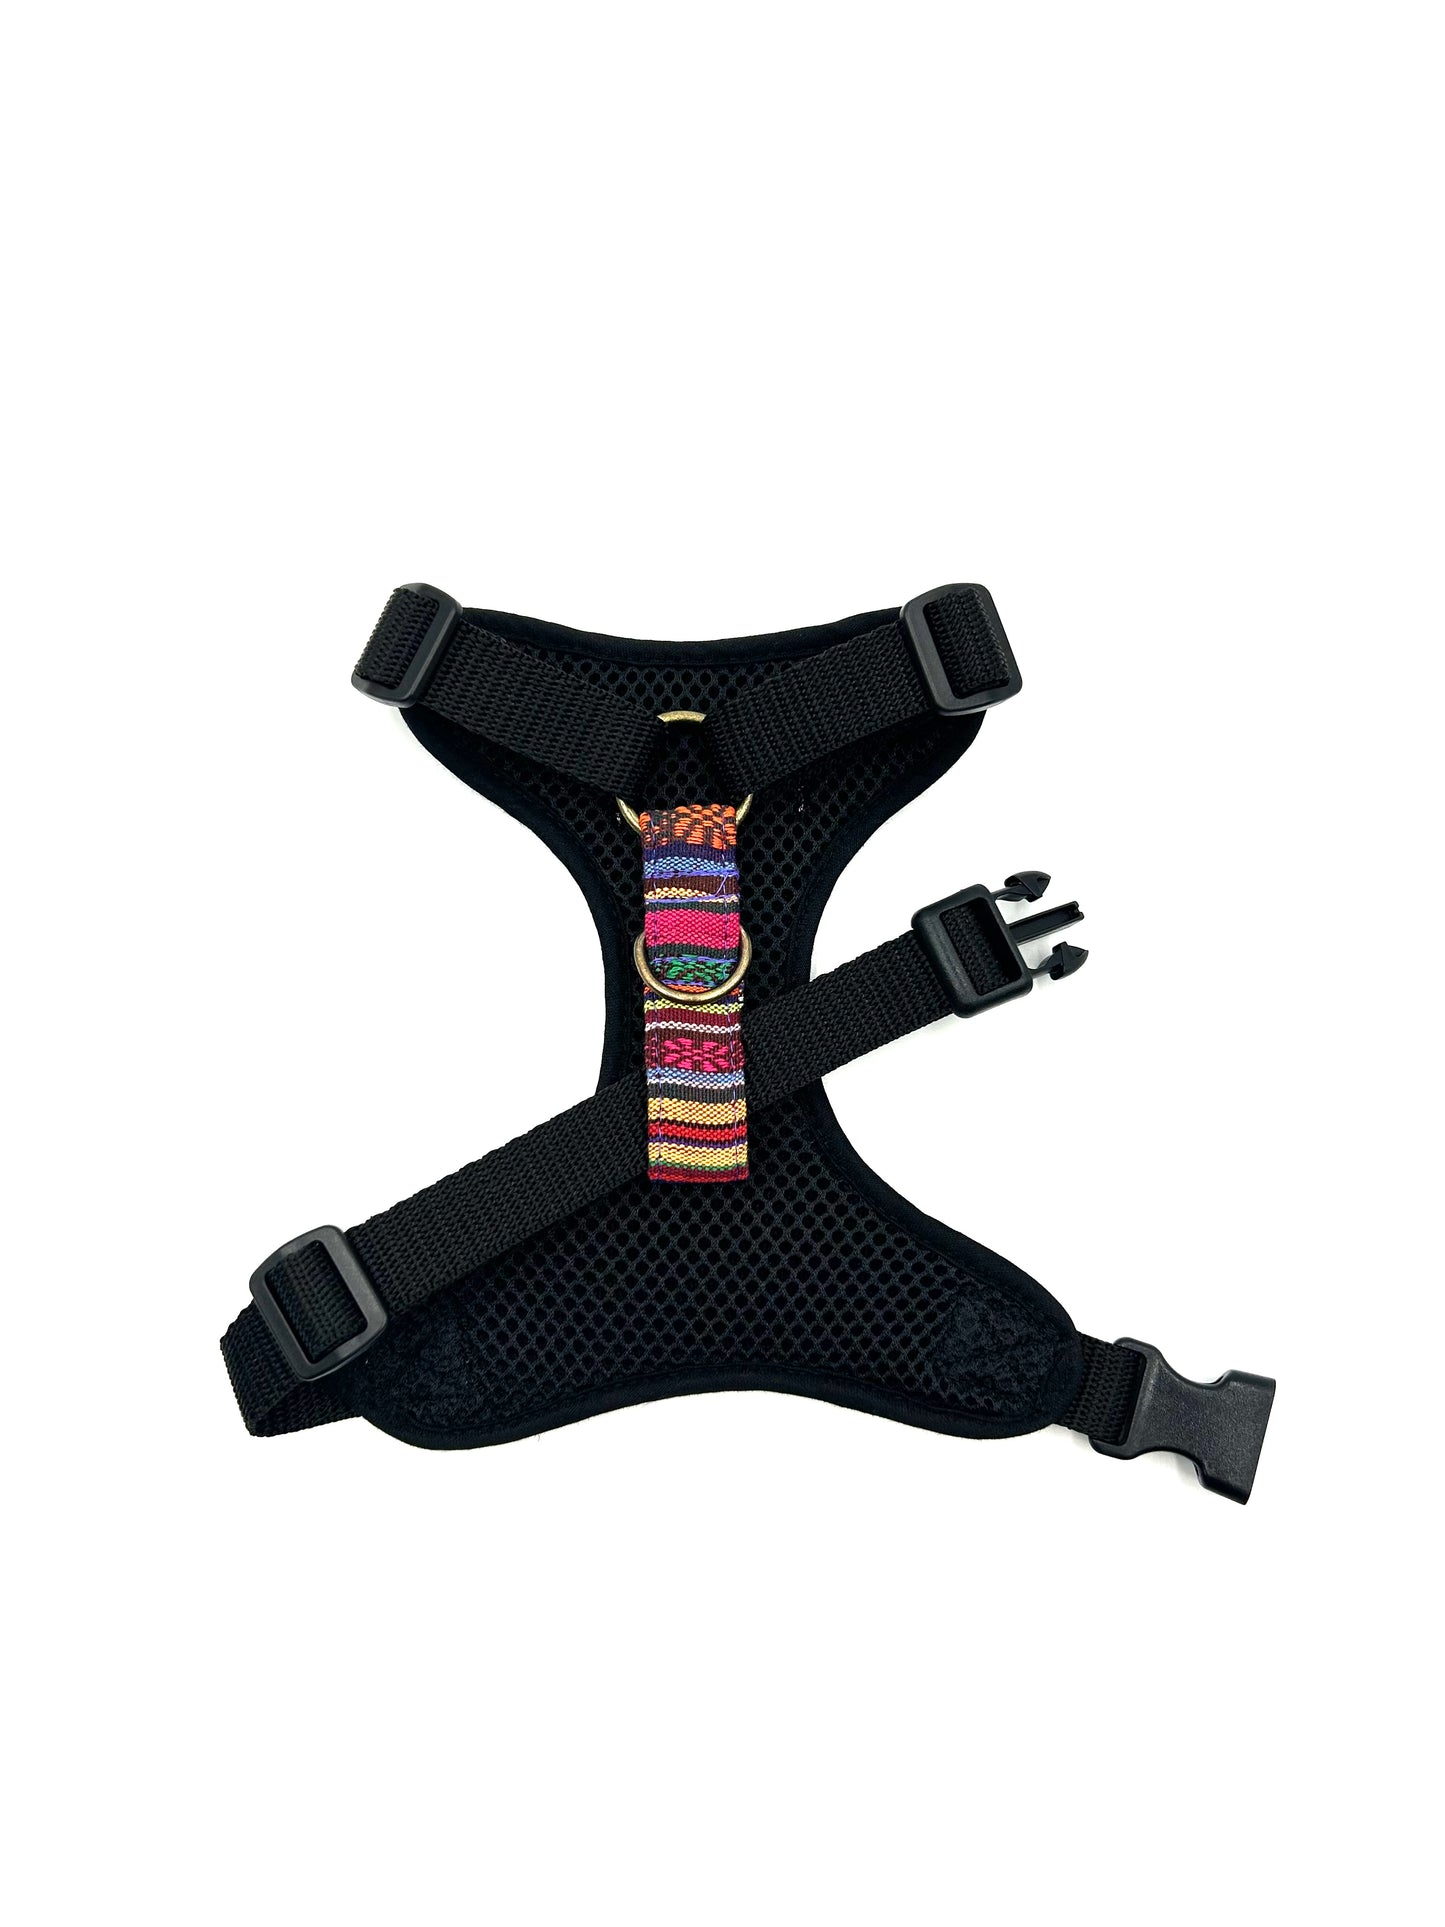 Mexican Dream Dog Harness